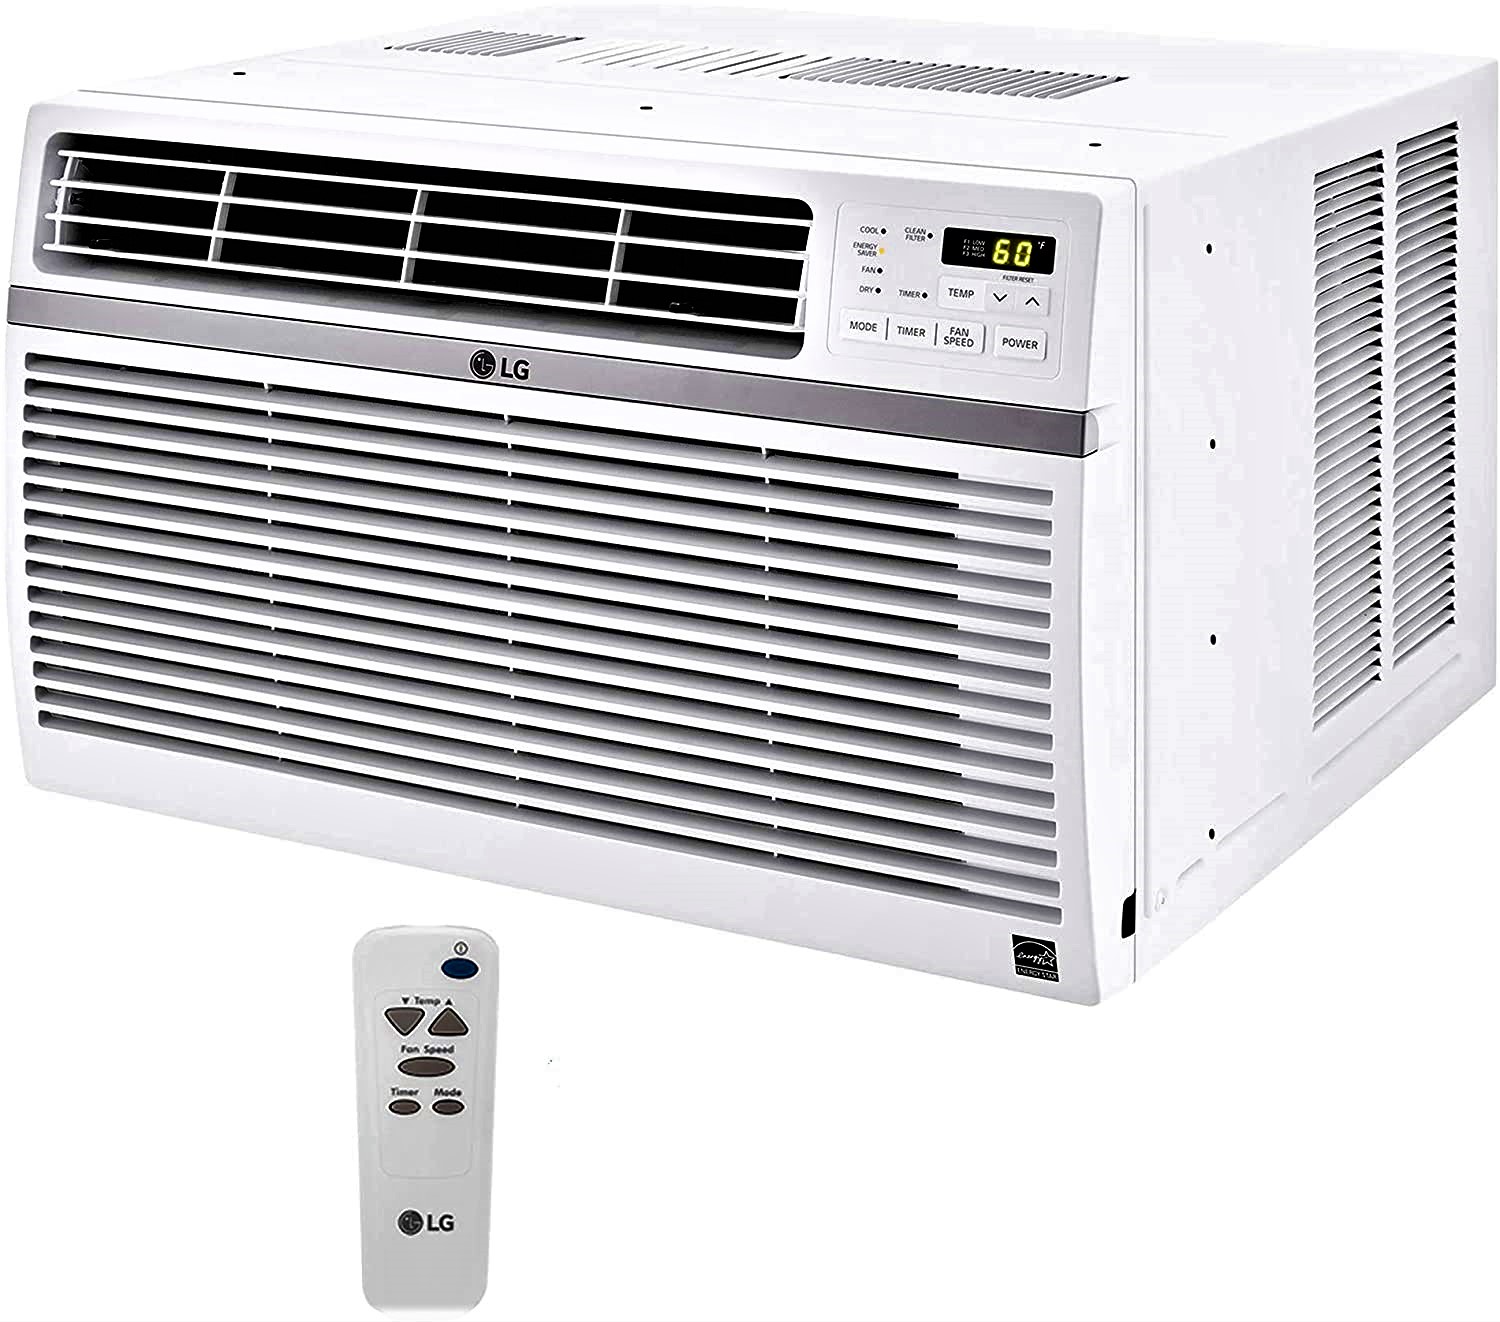 71MQdDPDc3L. AC SL1500 10 BEST AIR CONDITIONERS FOR YOUR GARAGE 2021 REVIEW